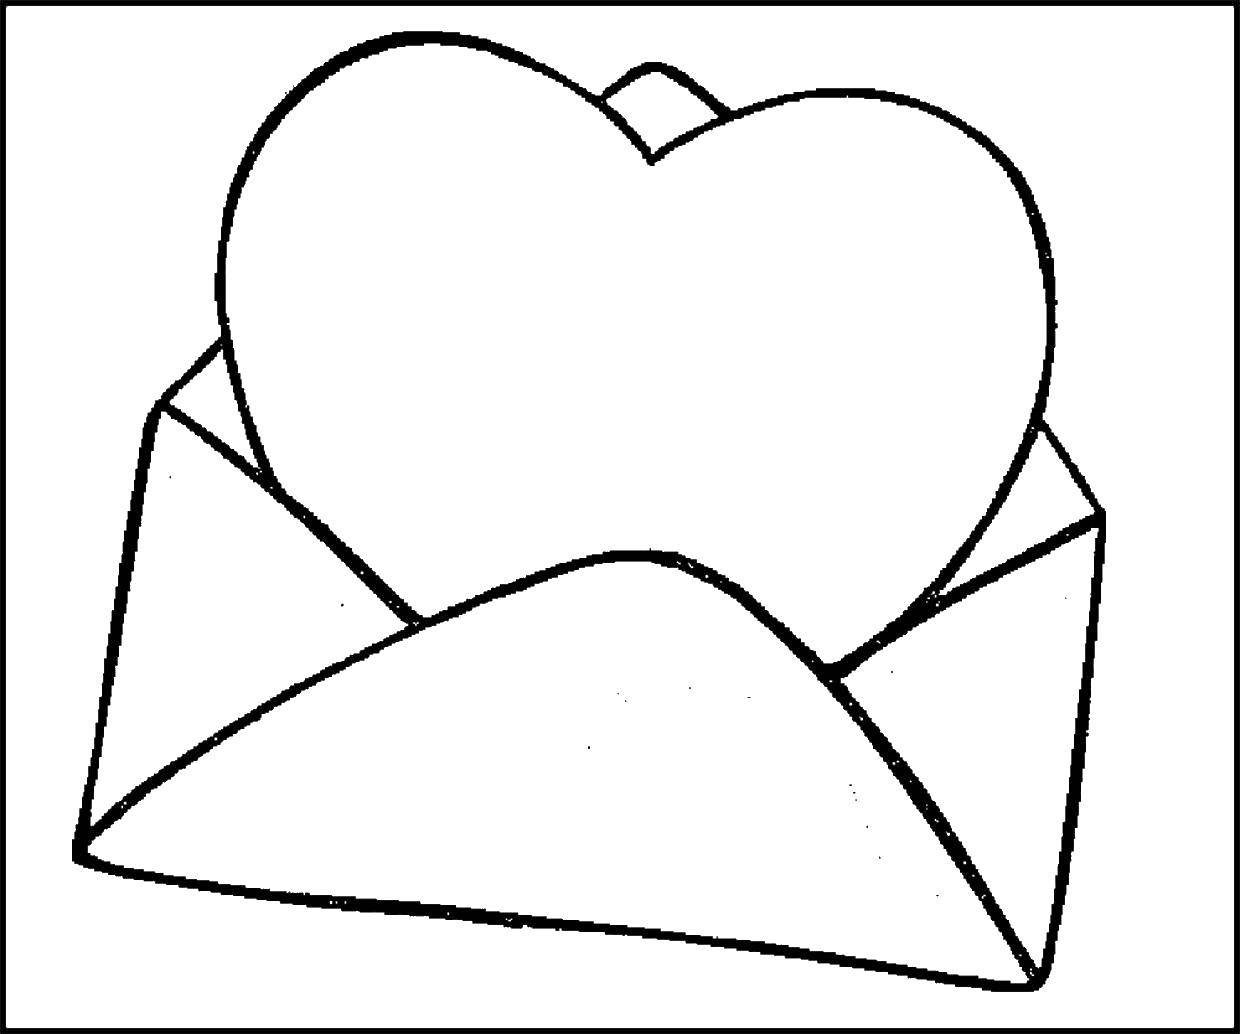 Online coloring pages coloring page heart in envelope st valentins day download print coloring page